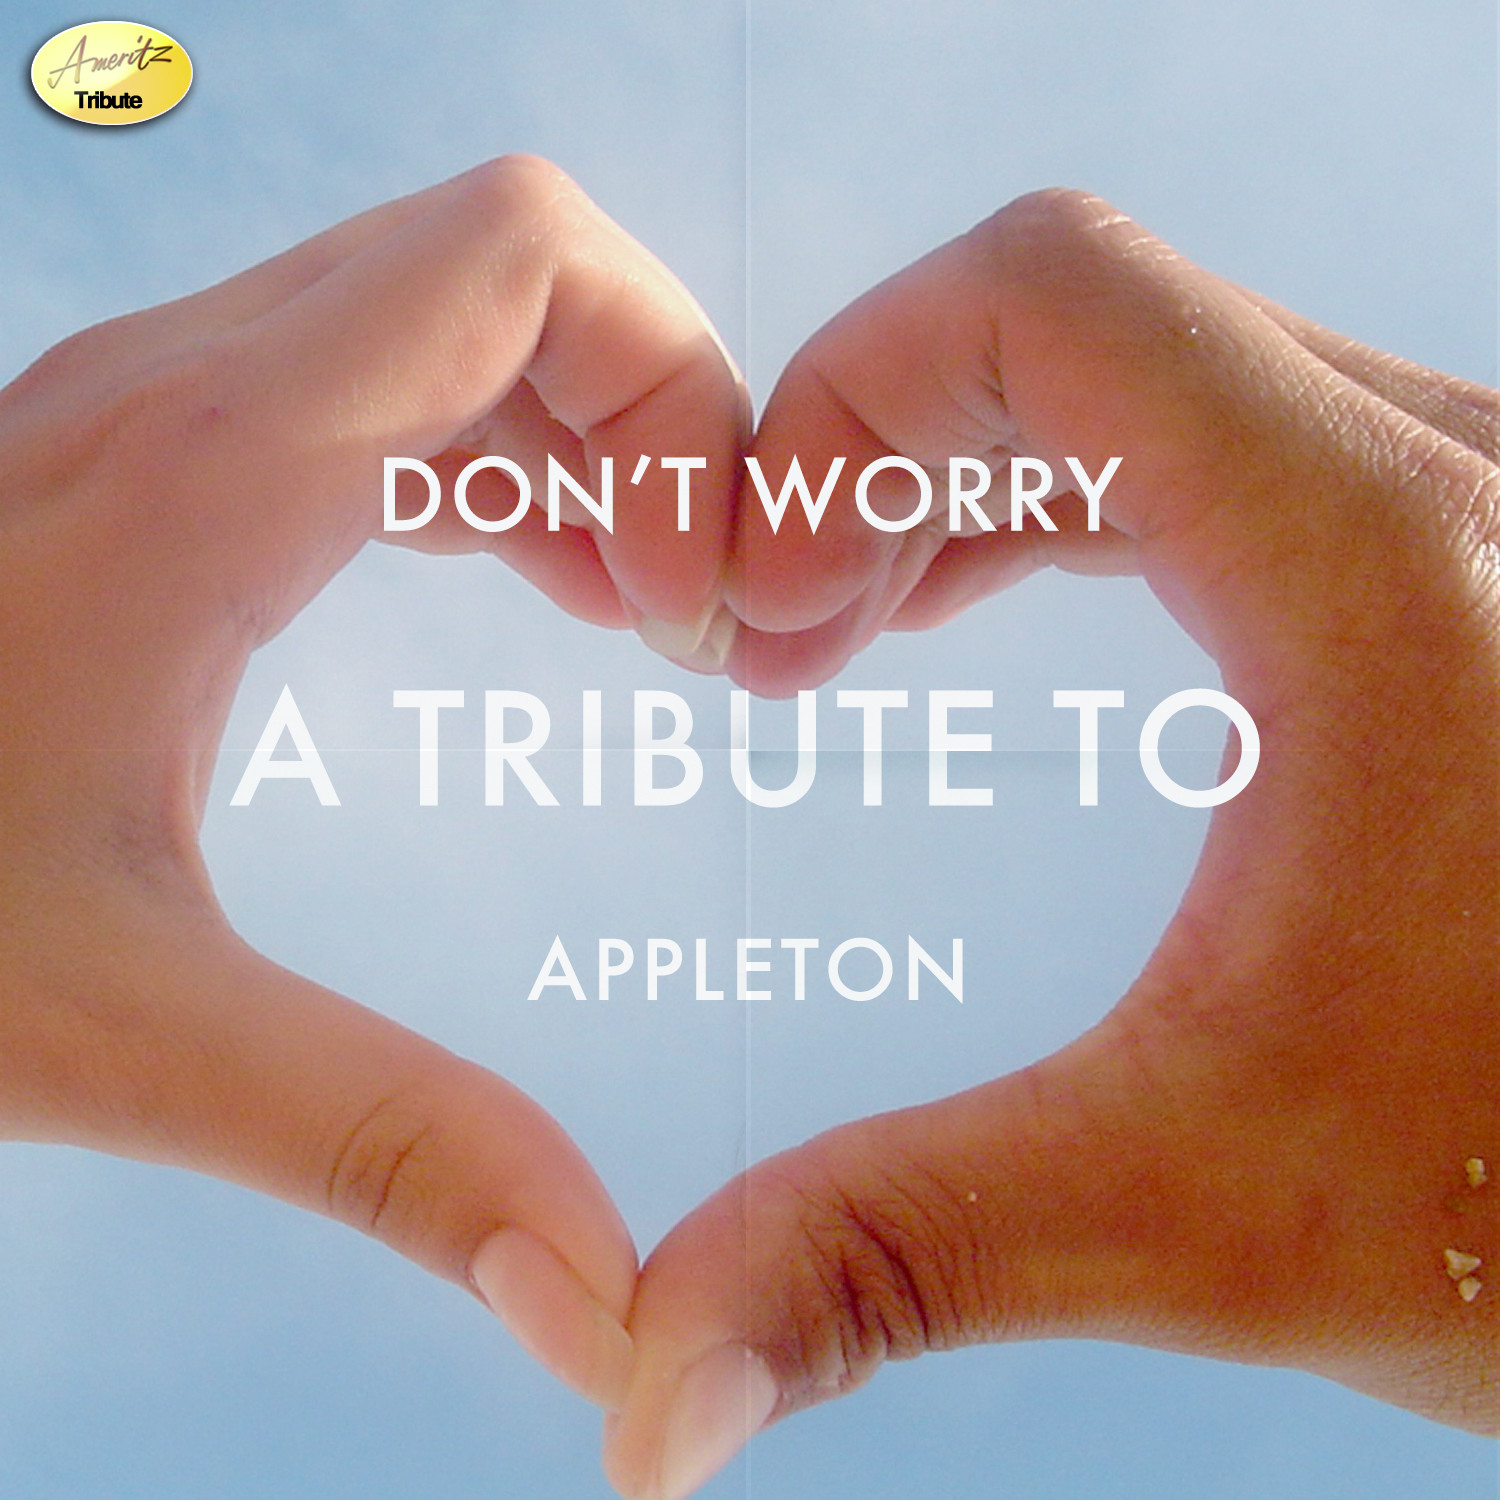 Don't Worry - A Tribute to Appleton